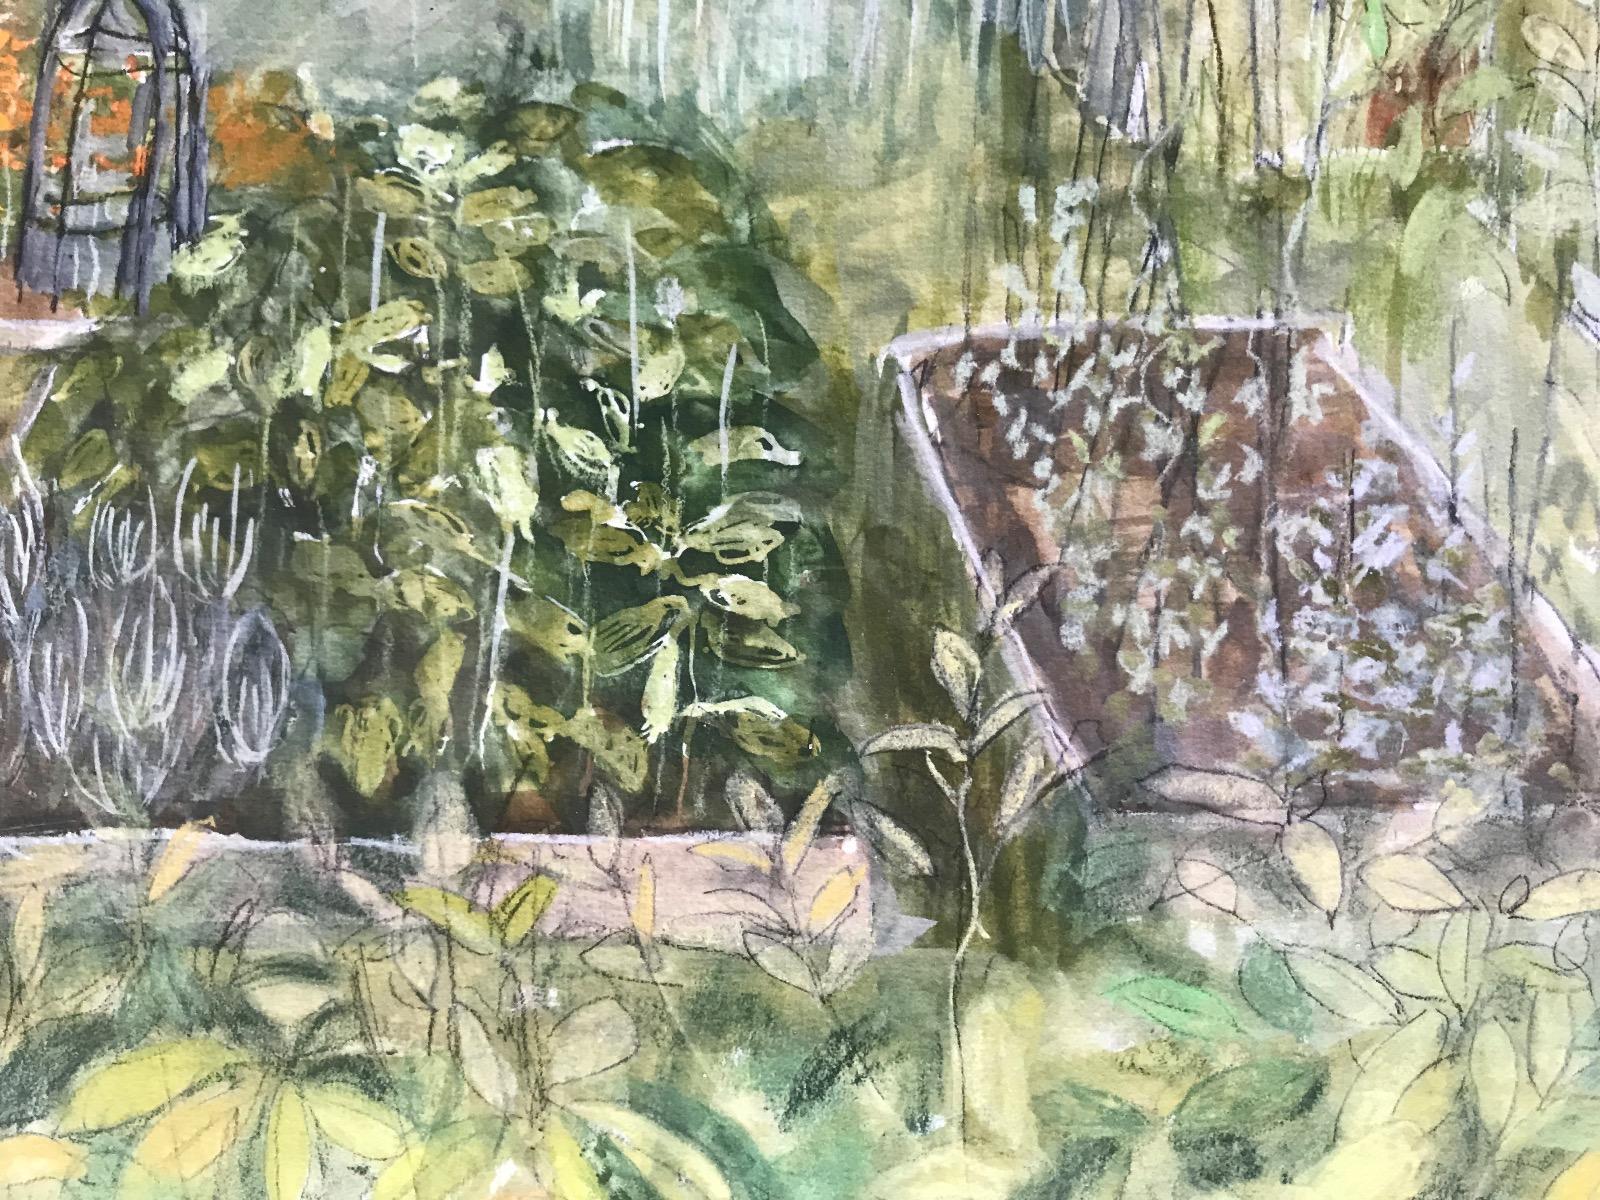 Allotments - Summer by Judith Yarrow is a depition of a luscious vegetable allotment with many shades of greens, pinks, oranges and yellows.

Additional Information:

Giclée Print on Paper

52 H x 38 W x 0.5 D cm (20.47 x 14.96 x 0.20 in)

Sold